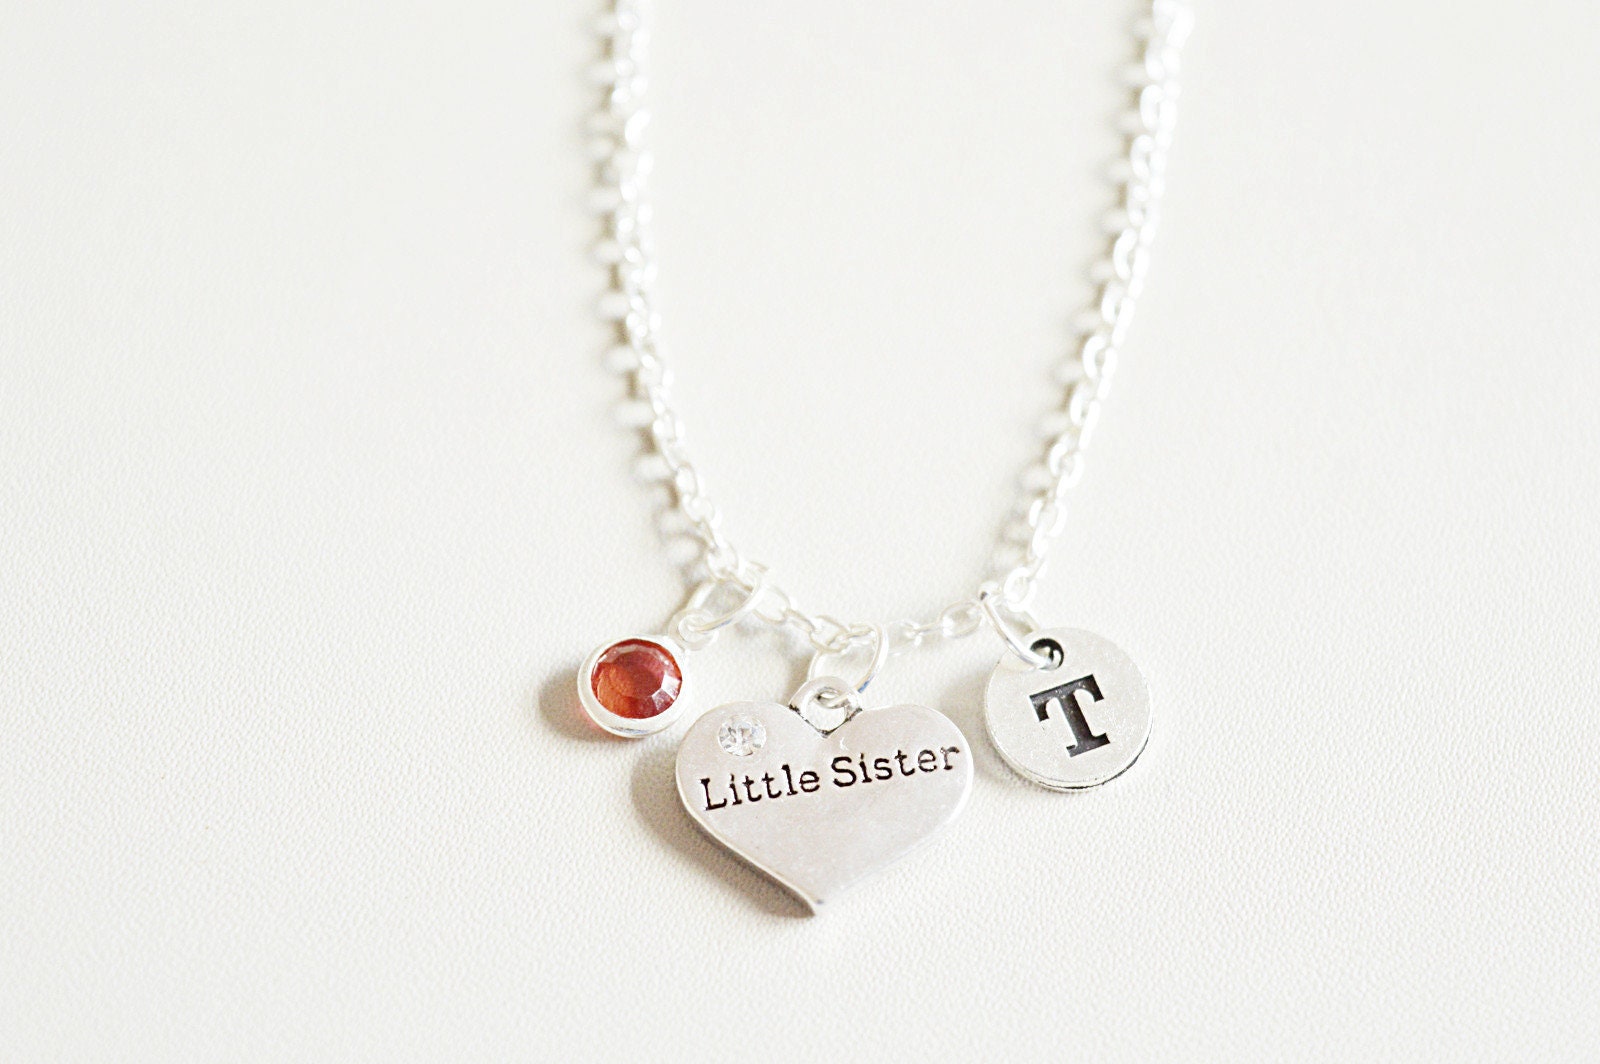 Little Sister Gift, Sister Gift, Little Sister Necklace, Little Sister pendant, Little Sister Charm, Little Sis, Lil Sis,Personalized Sister